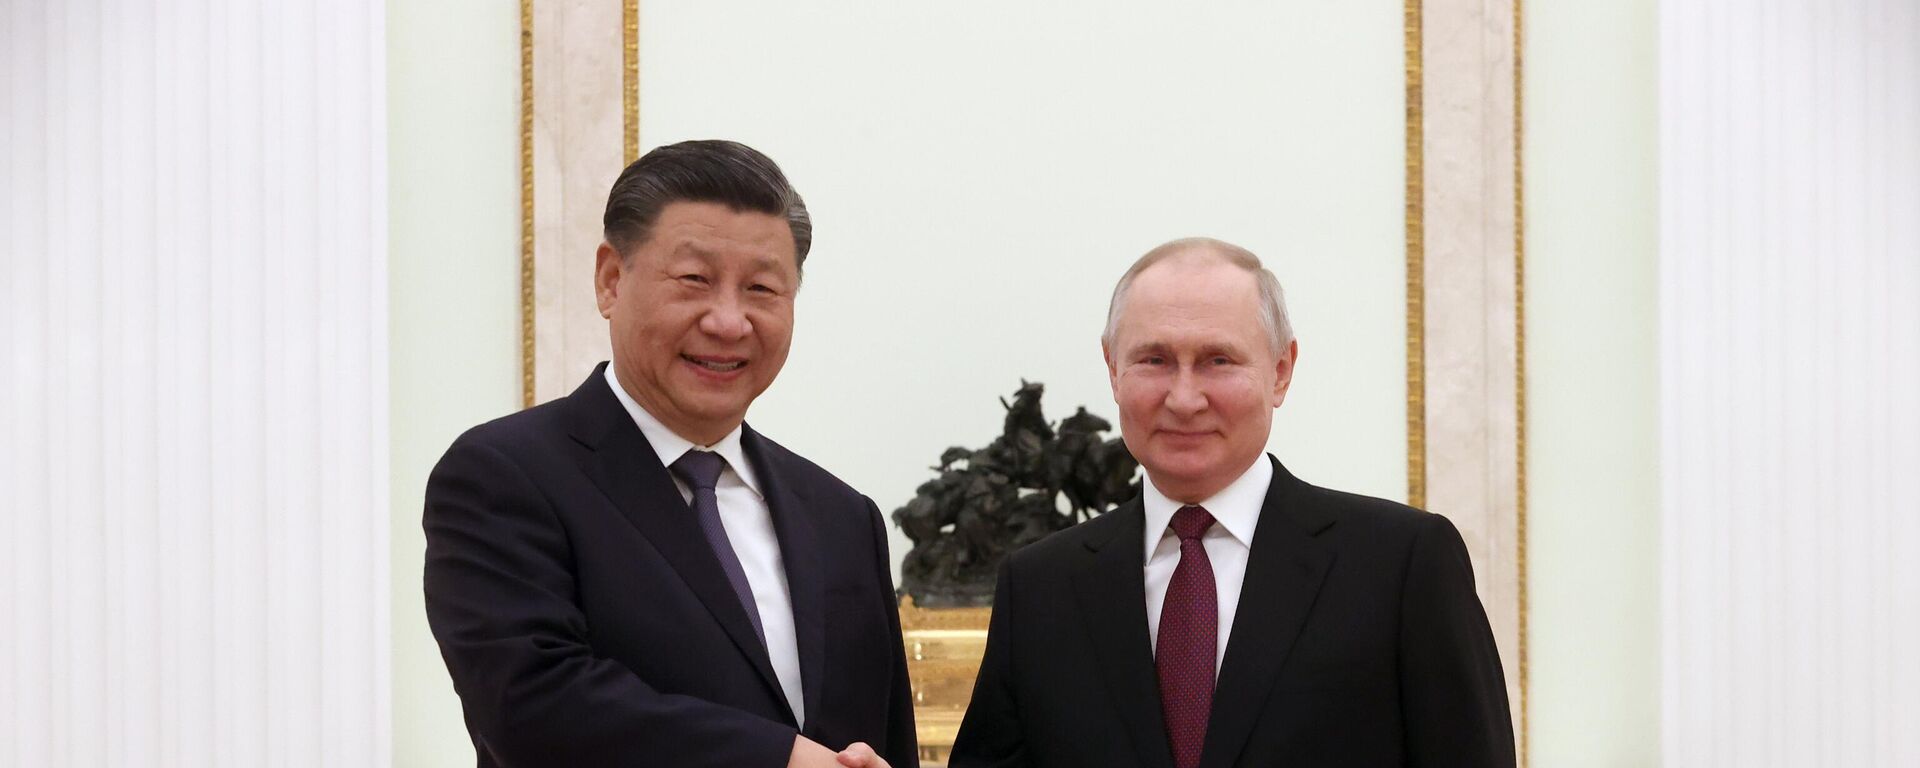 Chinese President Xi Jinping and Russian President Vladimir Putin shake hands during their meeting at the Kremlin in Moscow, Russia. - Sputnik International, 1920, 16.10.2023